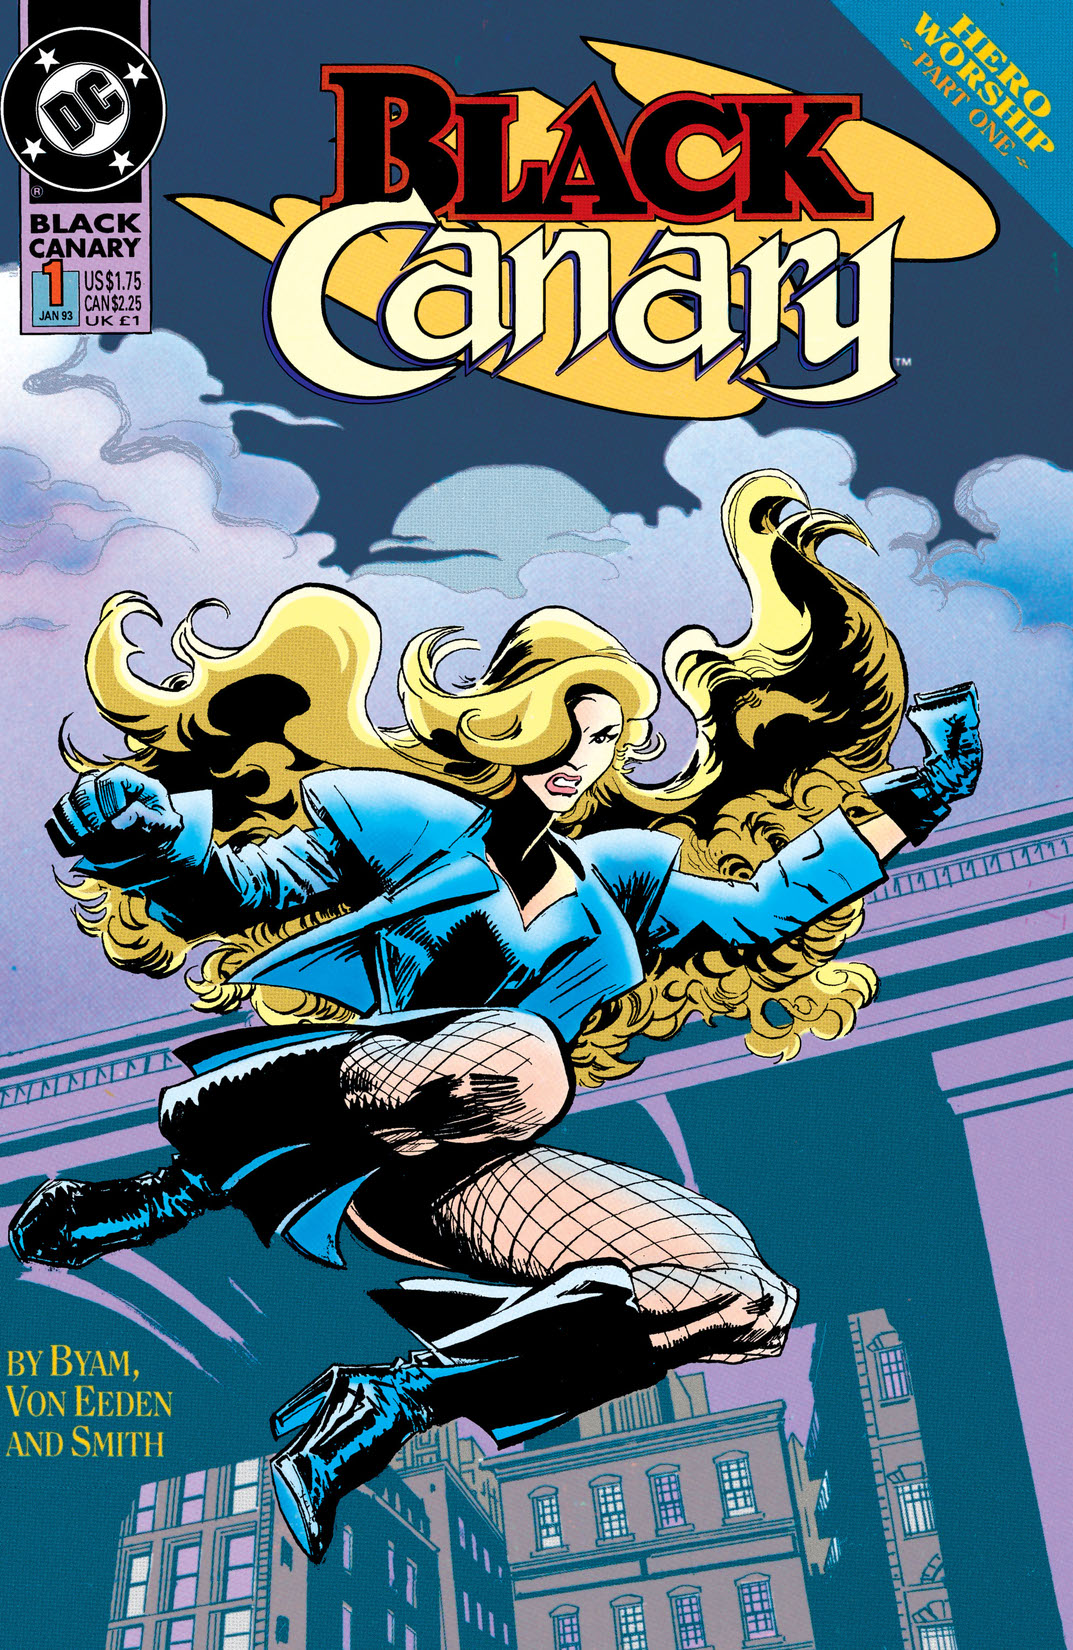 Black Canary (1992-) #1 preview images